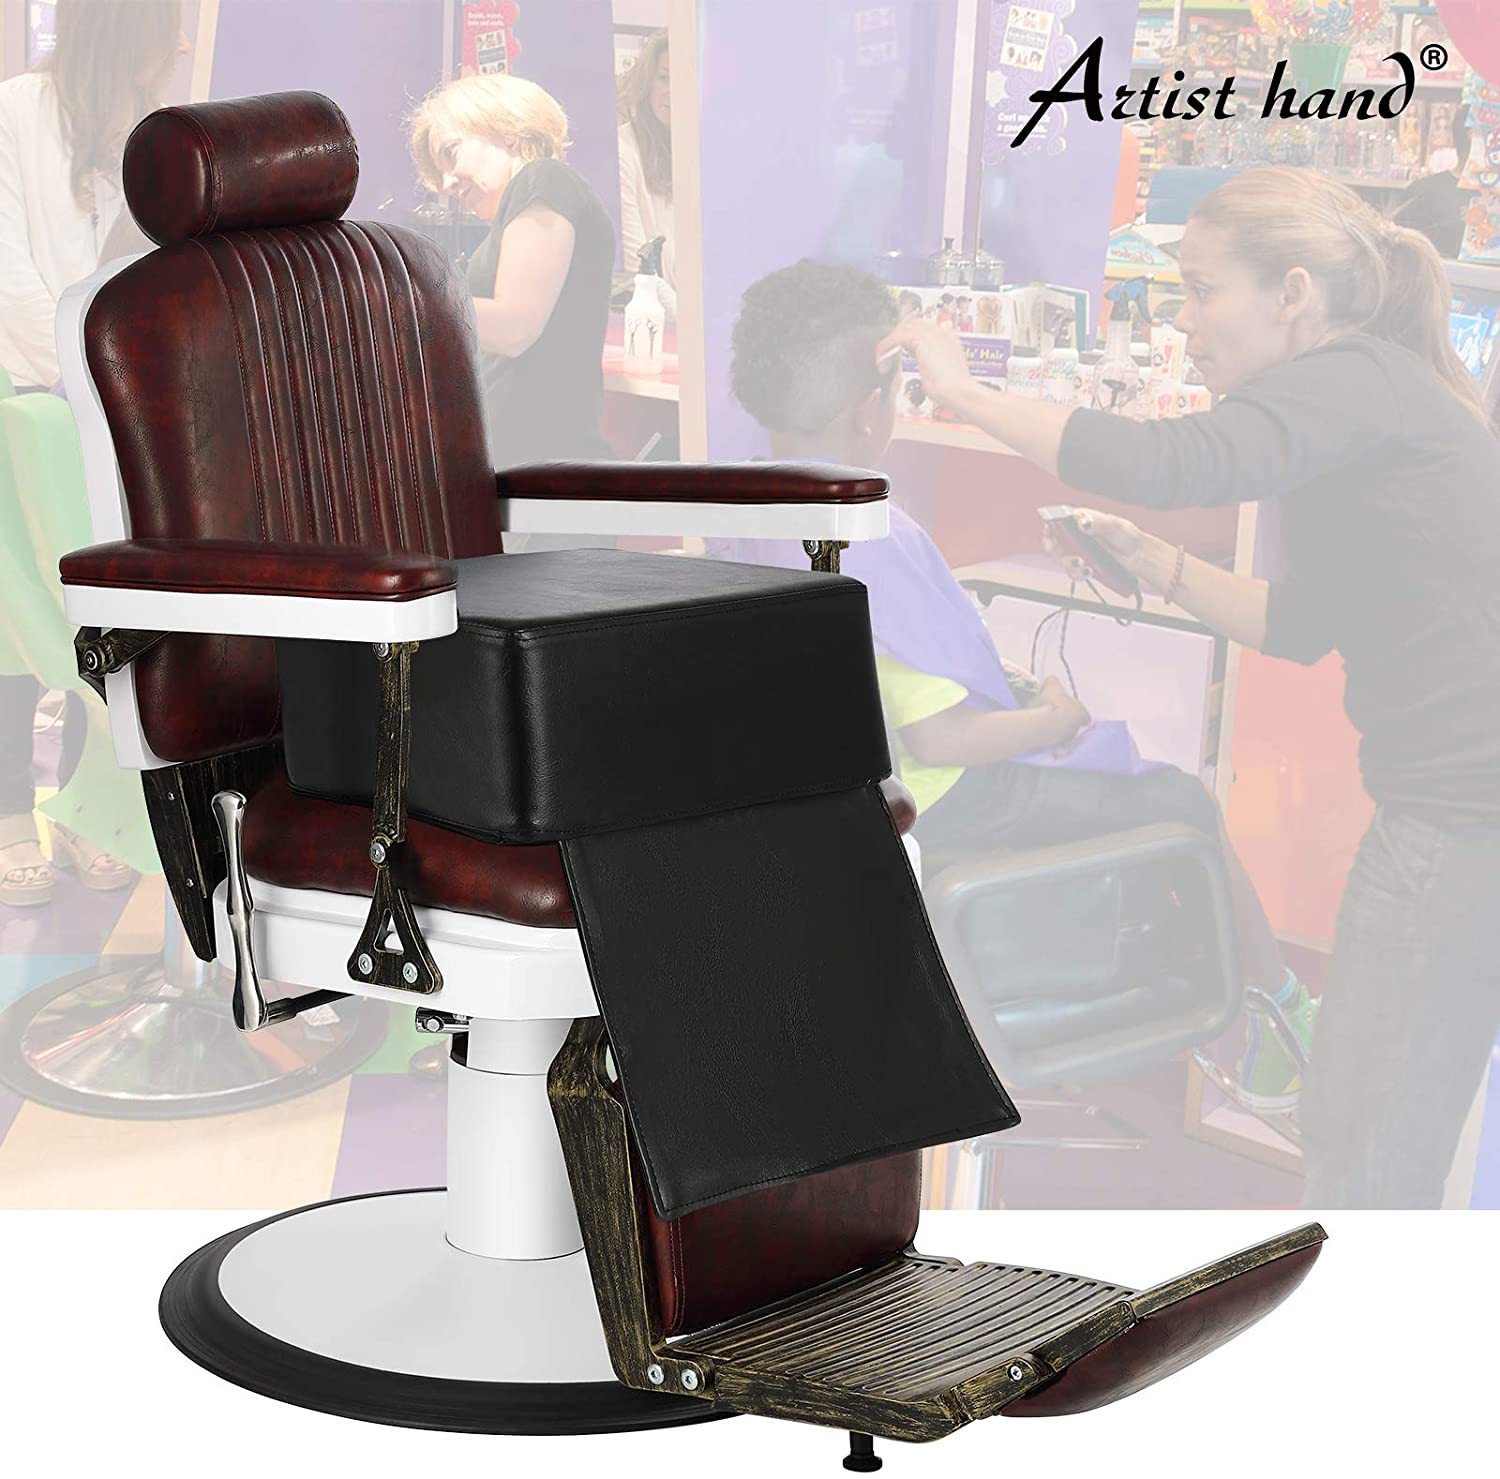 Primary image for Artist Hand Children Leather Cushion Oversize Barber Salon Booster Seat,Spa